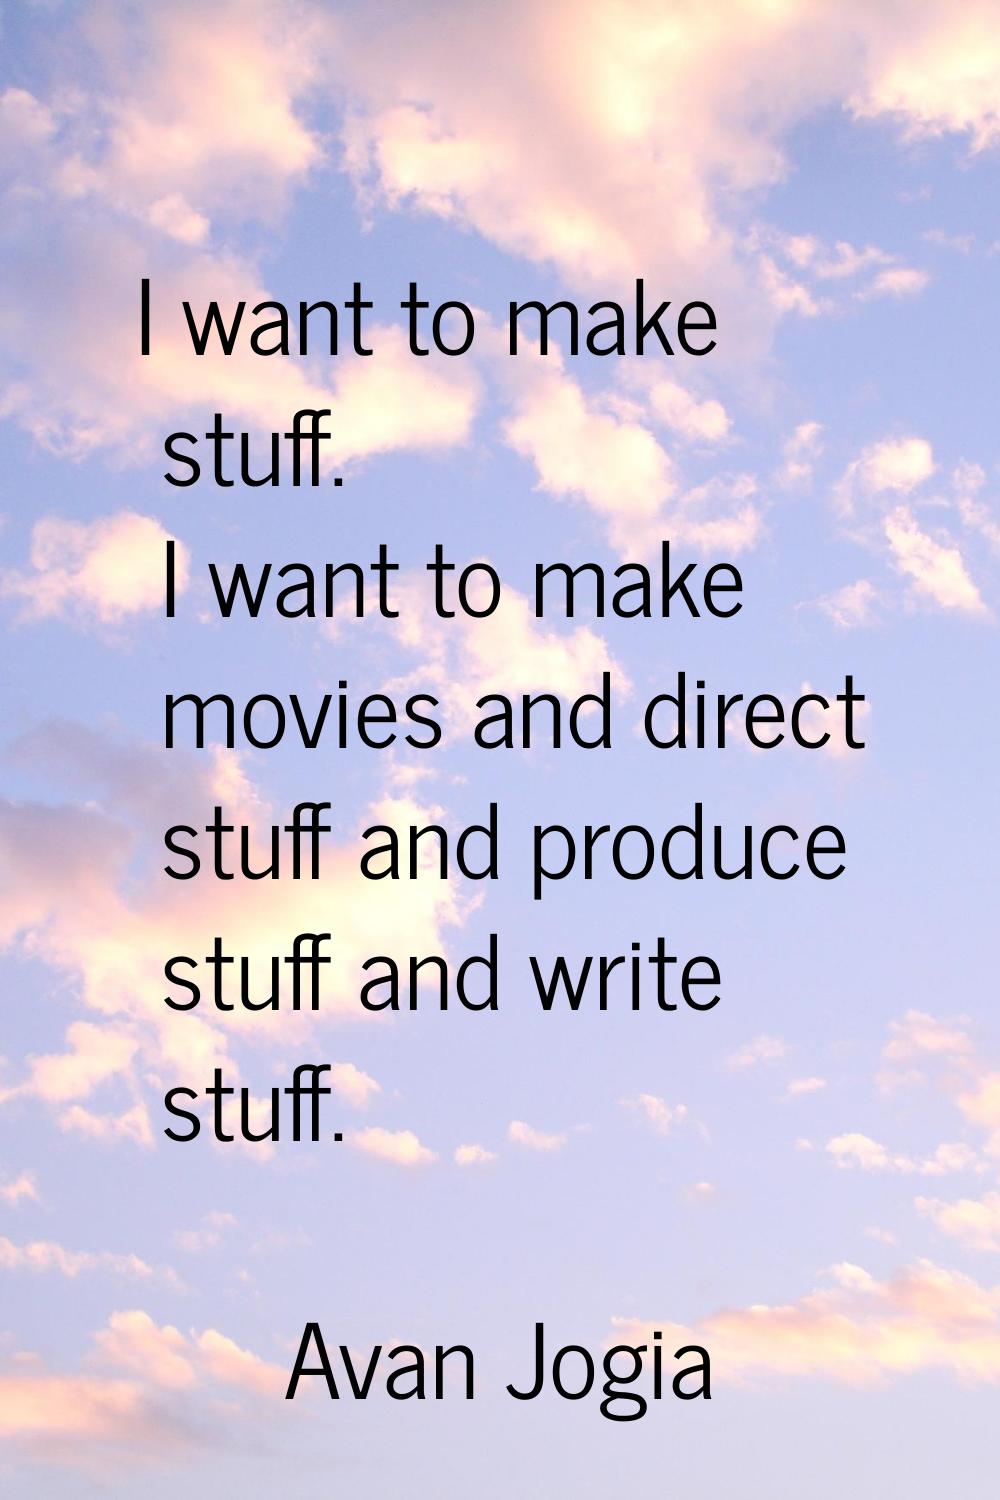 I want to make stuff. I want to make movies and direct stuff and produce stuff and write stuff.